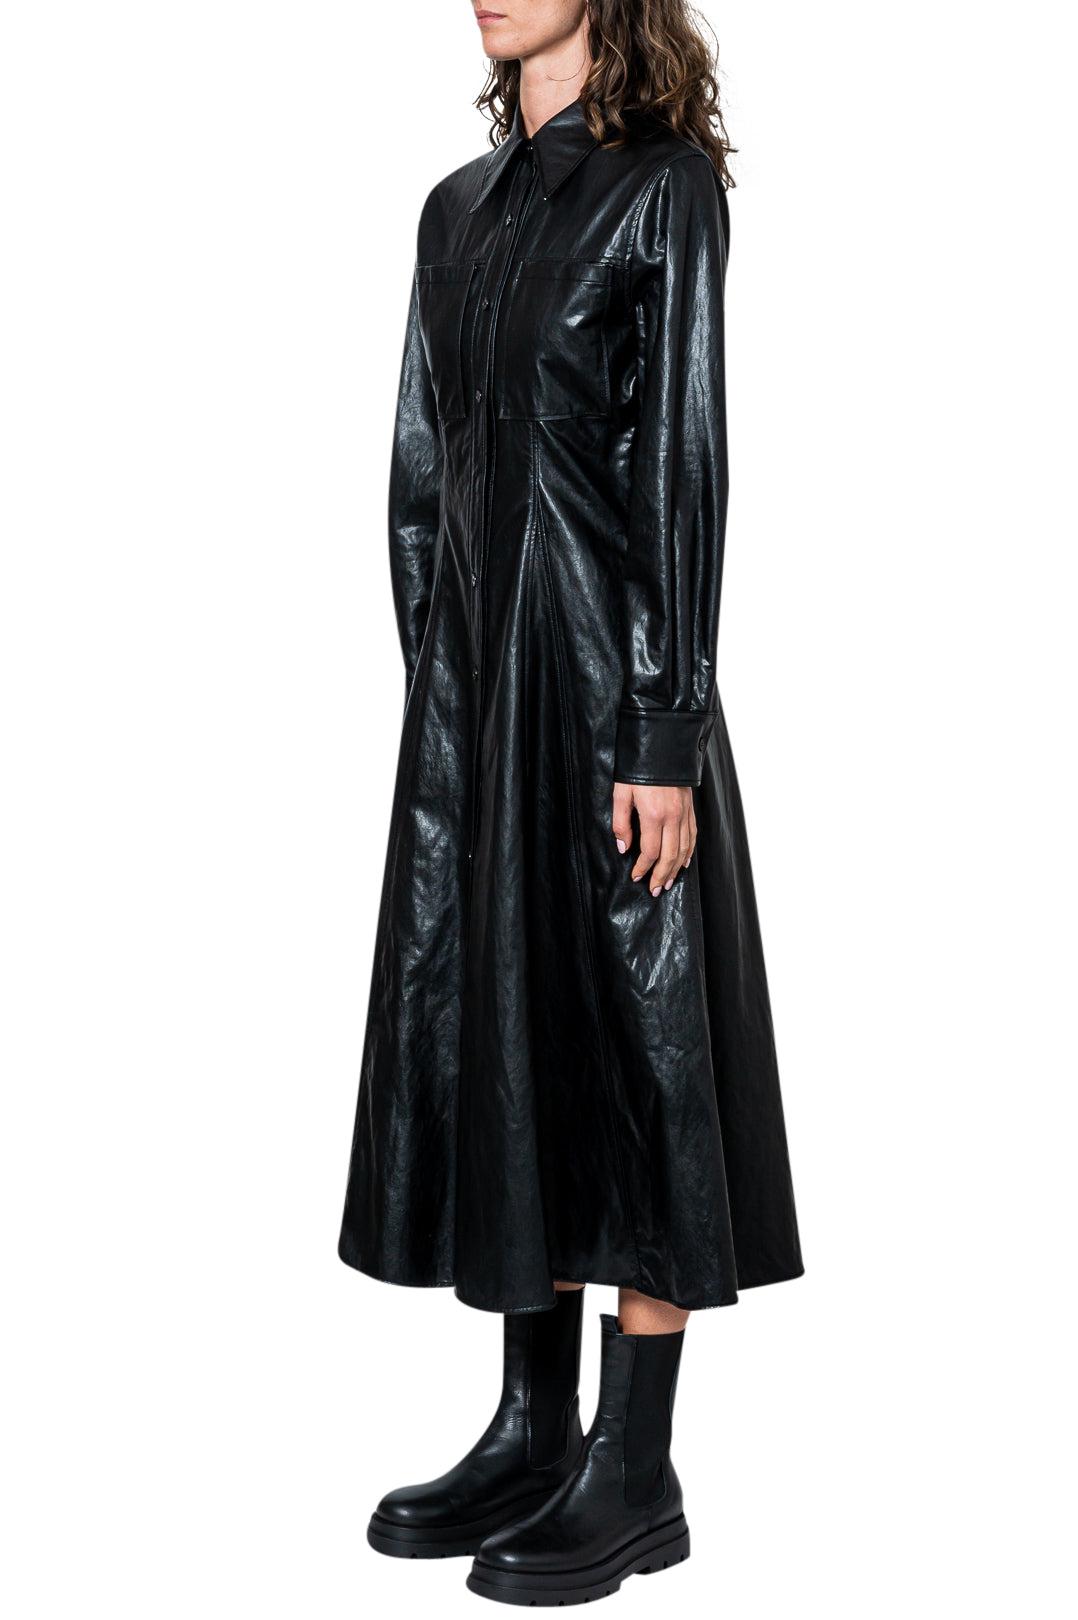 Lvir-Eco-leather long trench coat-LV20F-DR13-dgallerystore